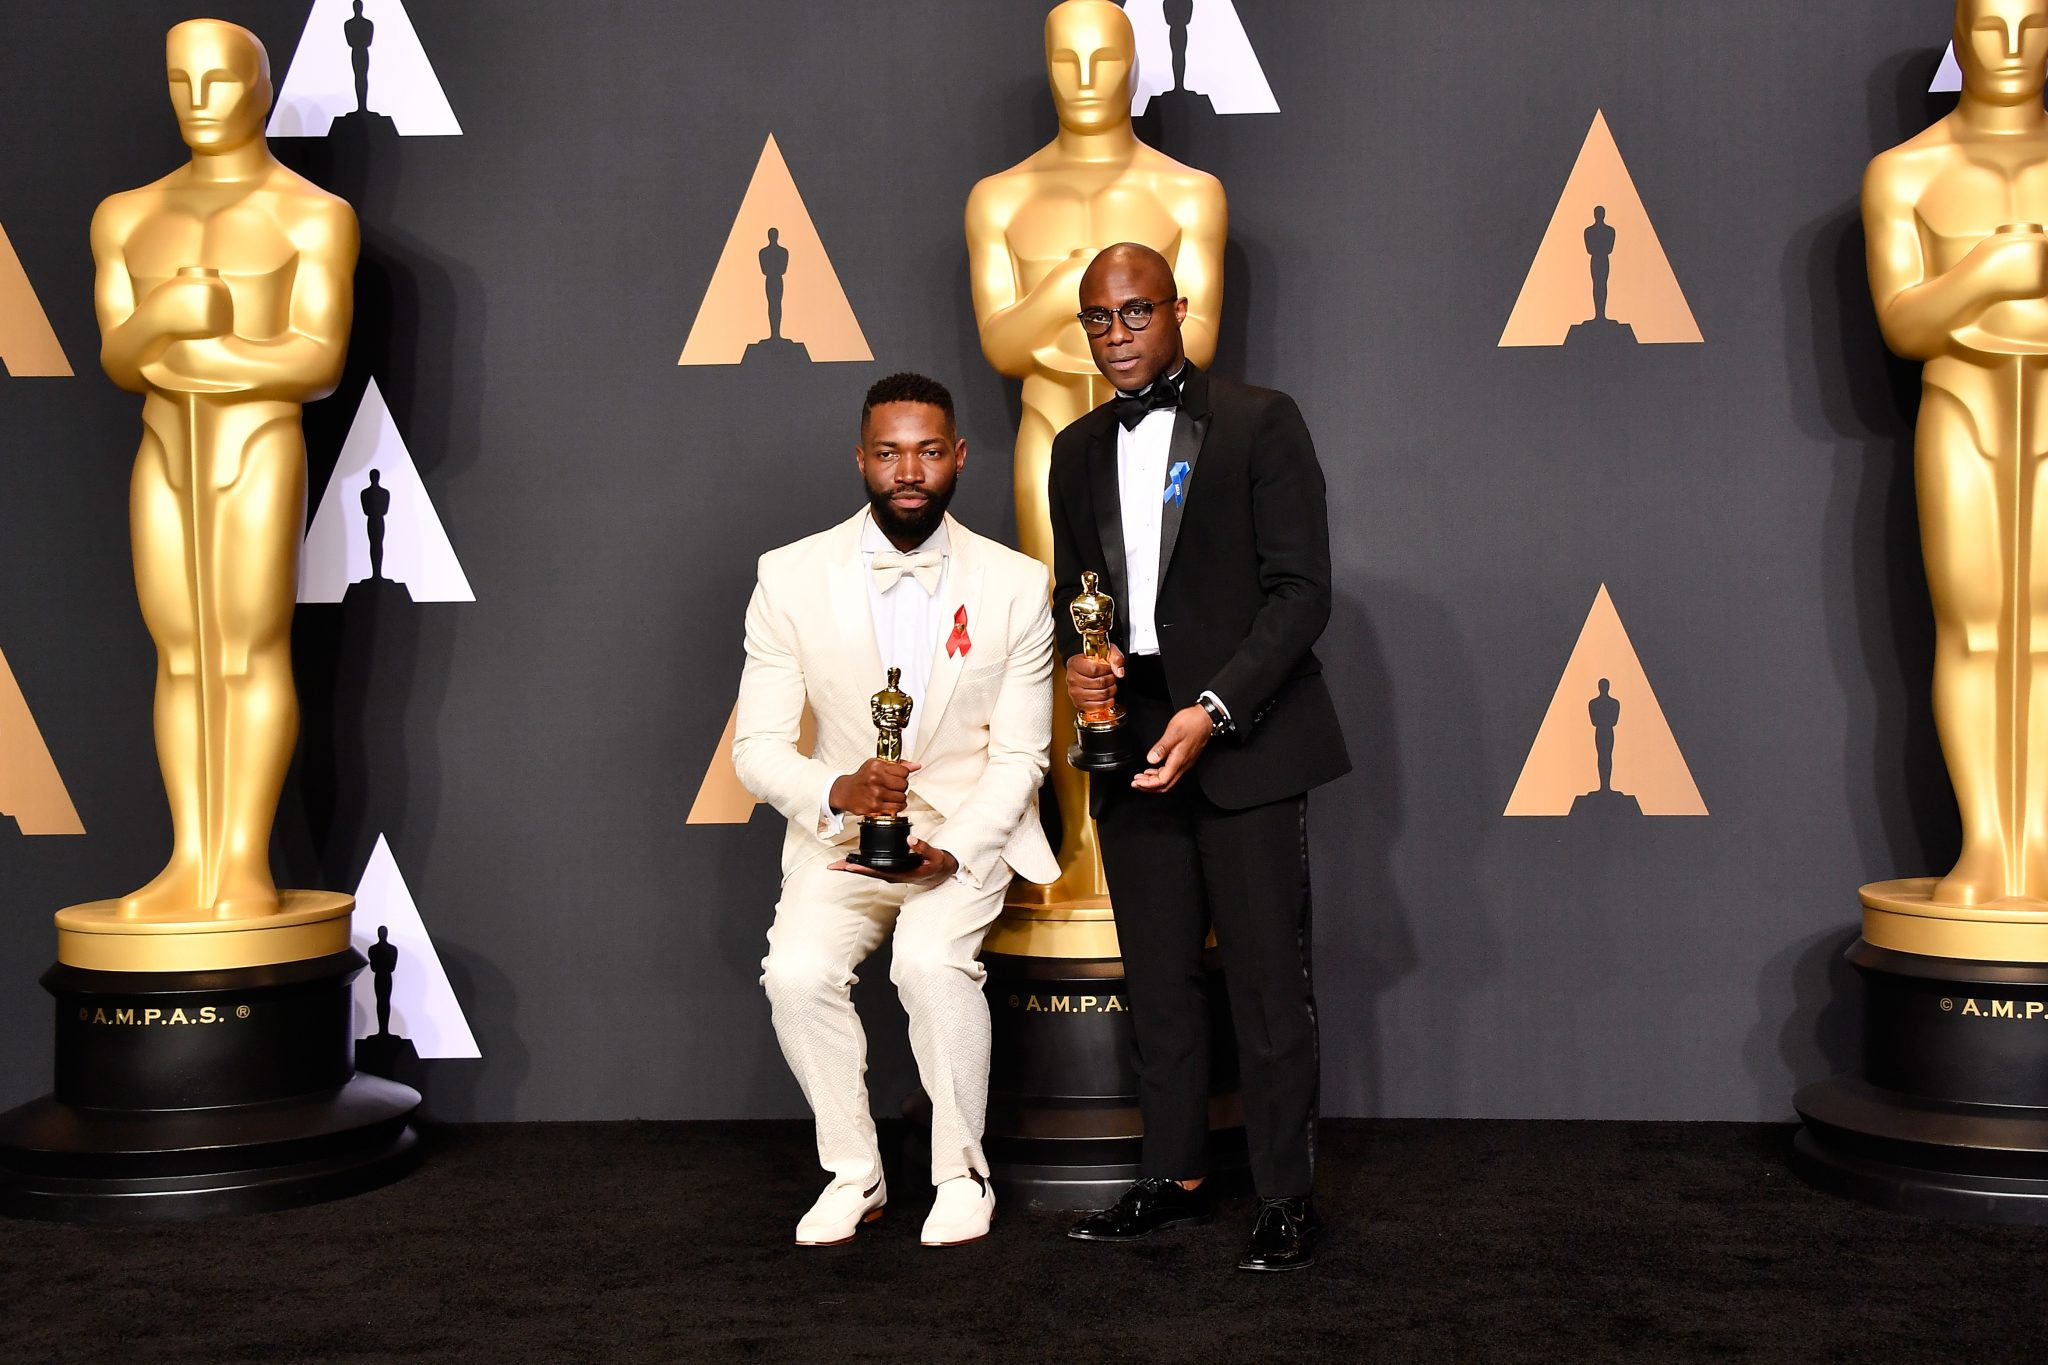 HOLLYWOOD, CA - FEBRUARY 26: Screenwriter Tarell Alvin McCraney (L) and writer/director Barry Jenkins, winners of Best Adapted Screenplay for 'Moonlight', pose in the press room during the 89th Annual Academy Awards at Hollywood & Highland Center on February 26, 2017 in Hollywood, California.   Frazer Harrison/Getty Images/AFP